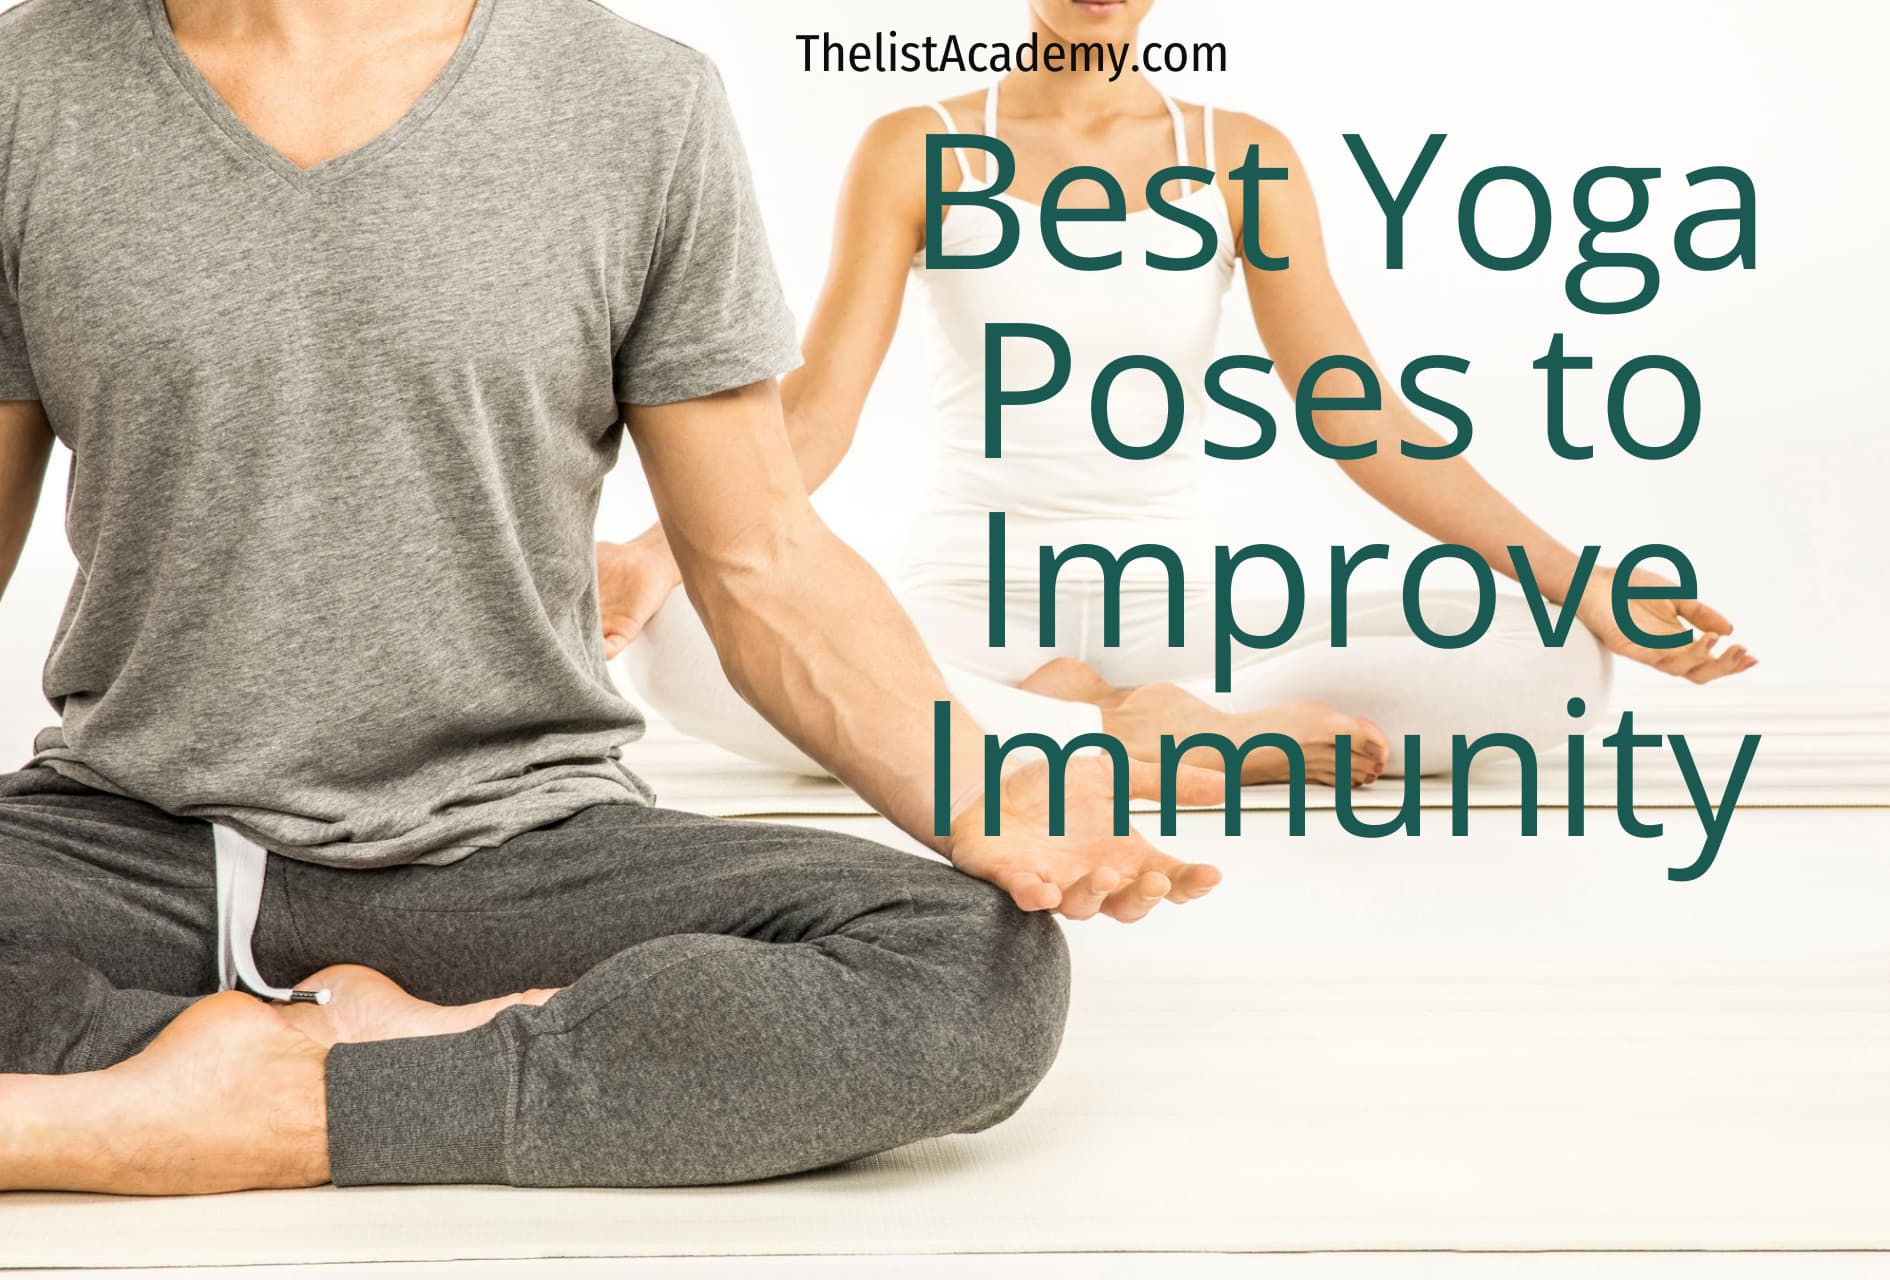 Cover Image For List : 10 Best Yoga Poses To Improve Immunity Or Immune System